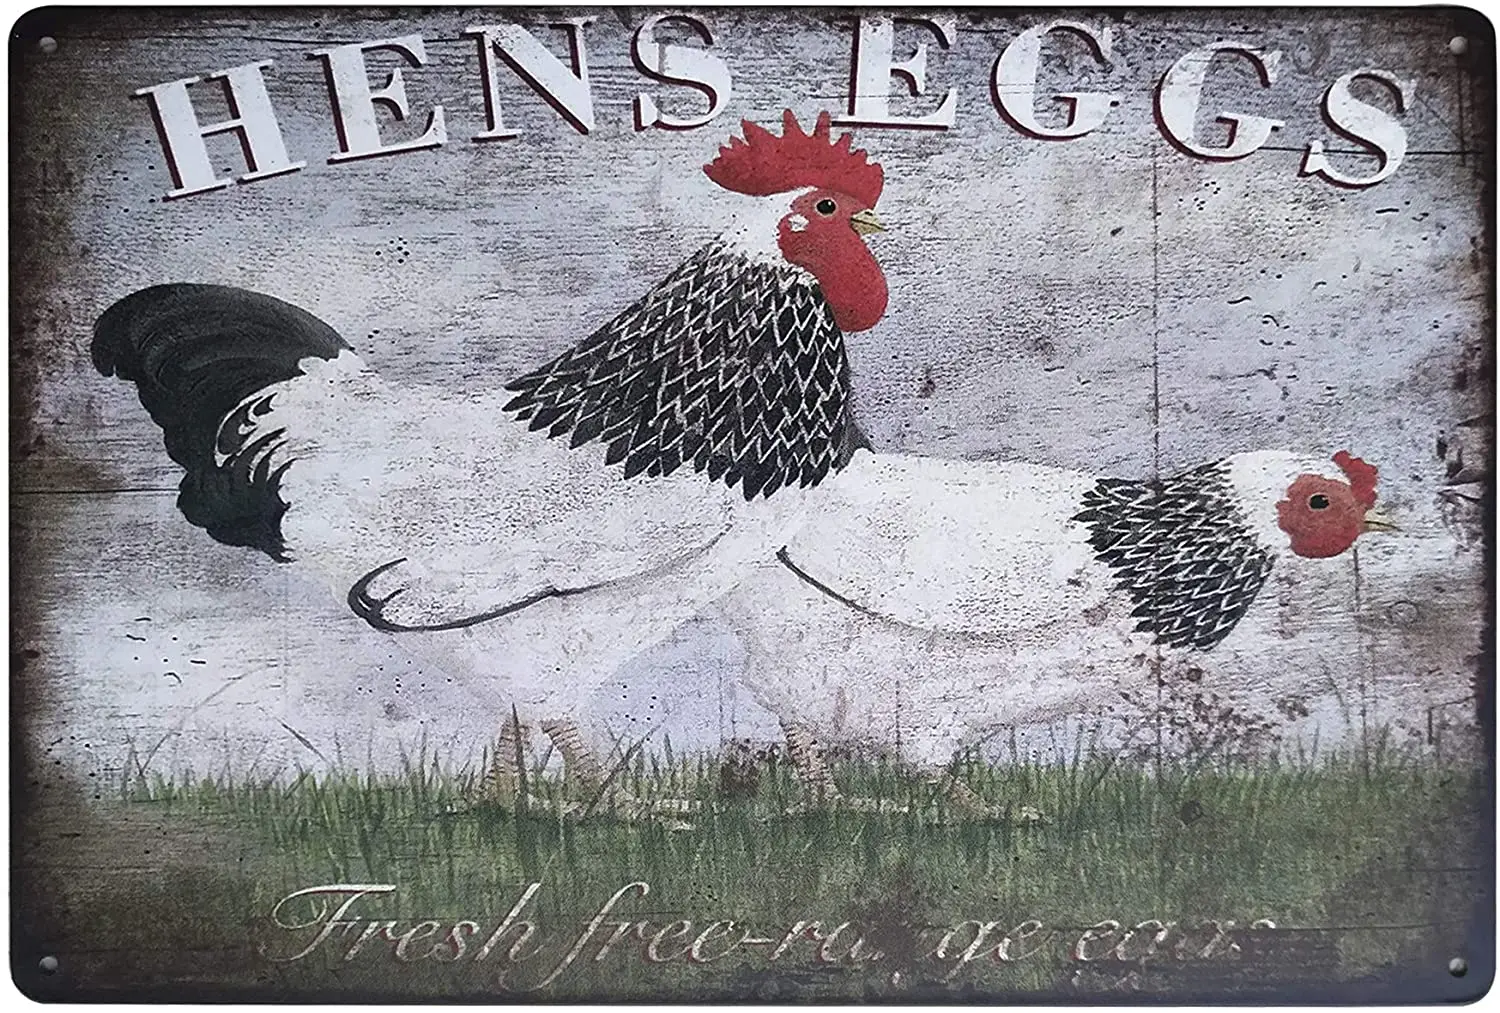 

Farmhouse Chicken House Chicken Farm Wall Fence Decorative Metal Tin Sign Hens Eggs Vintage Decorative Metal Plate 8x12 Inches